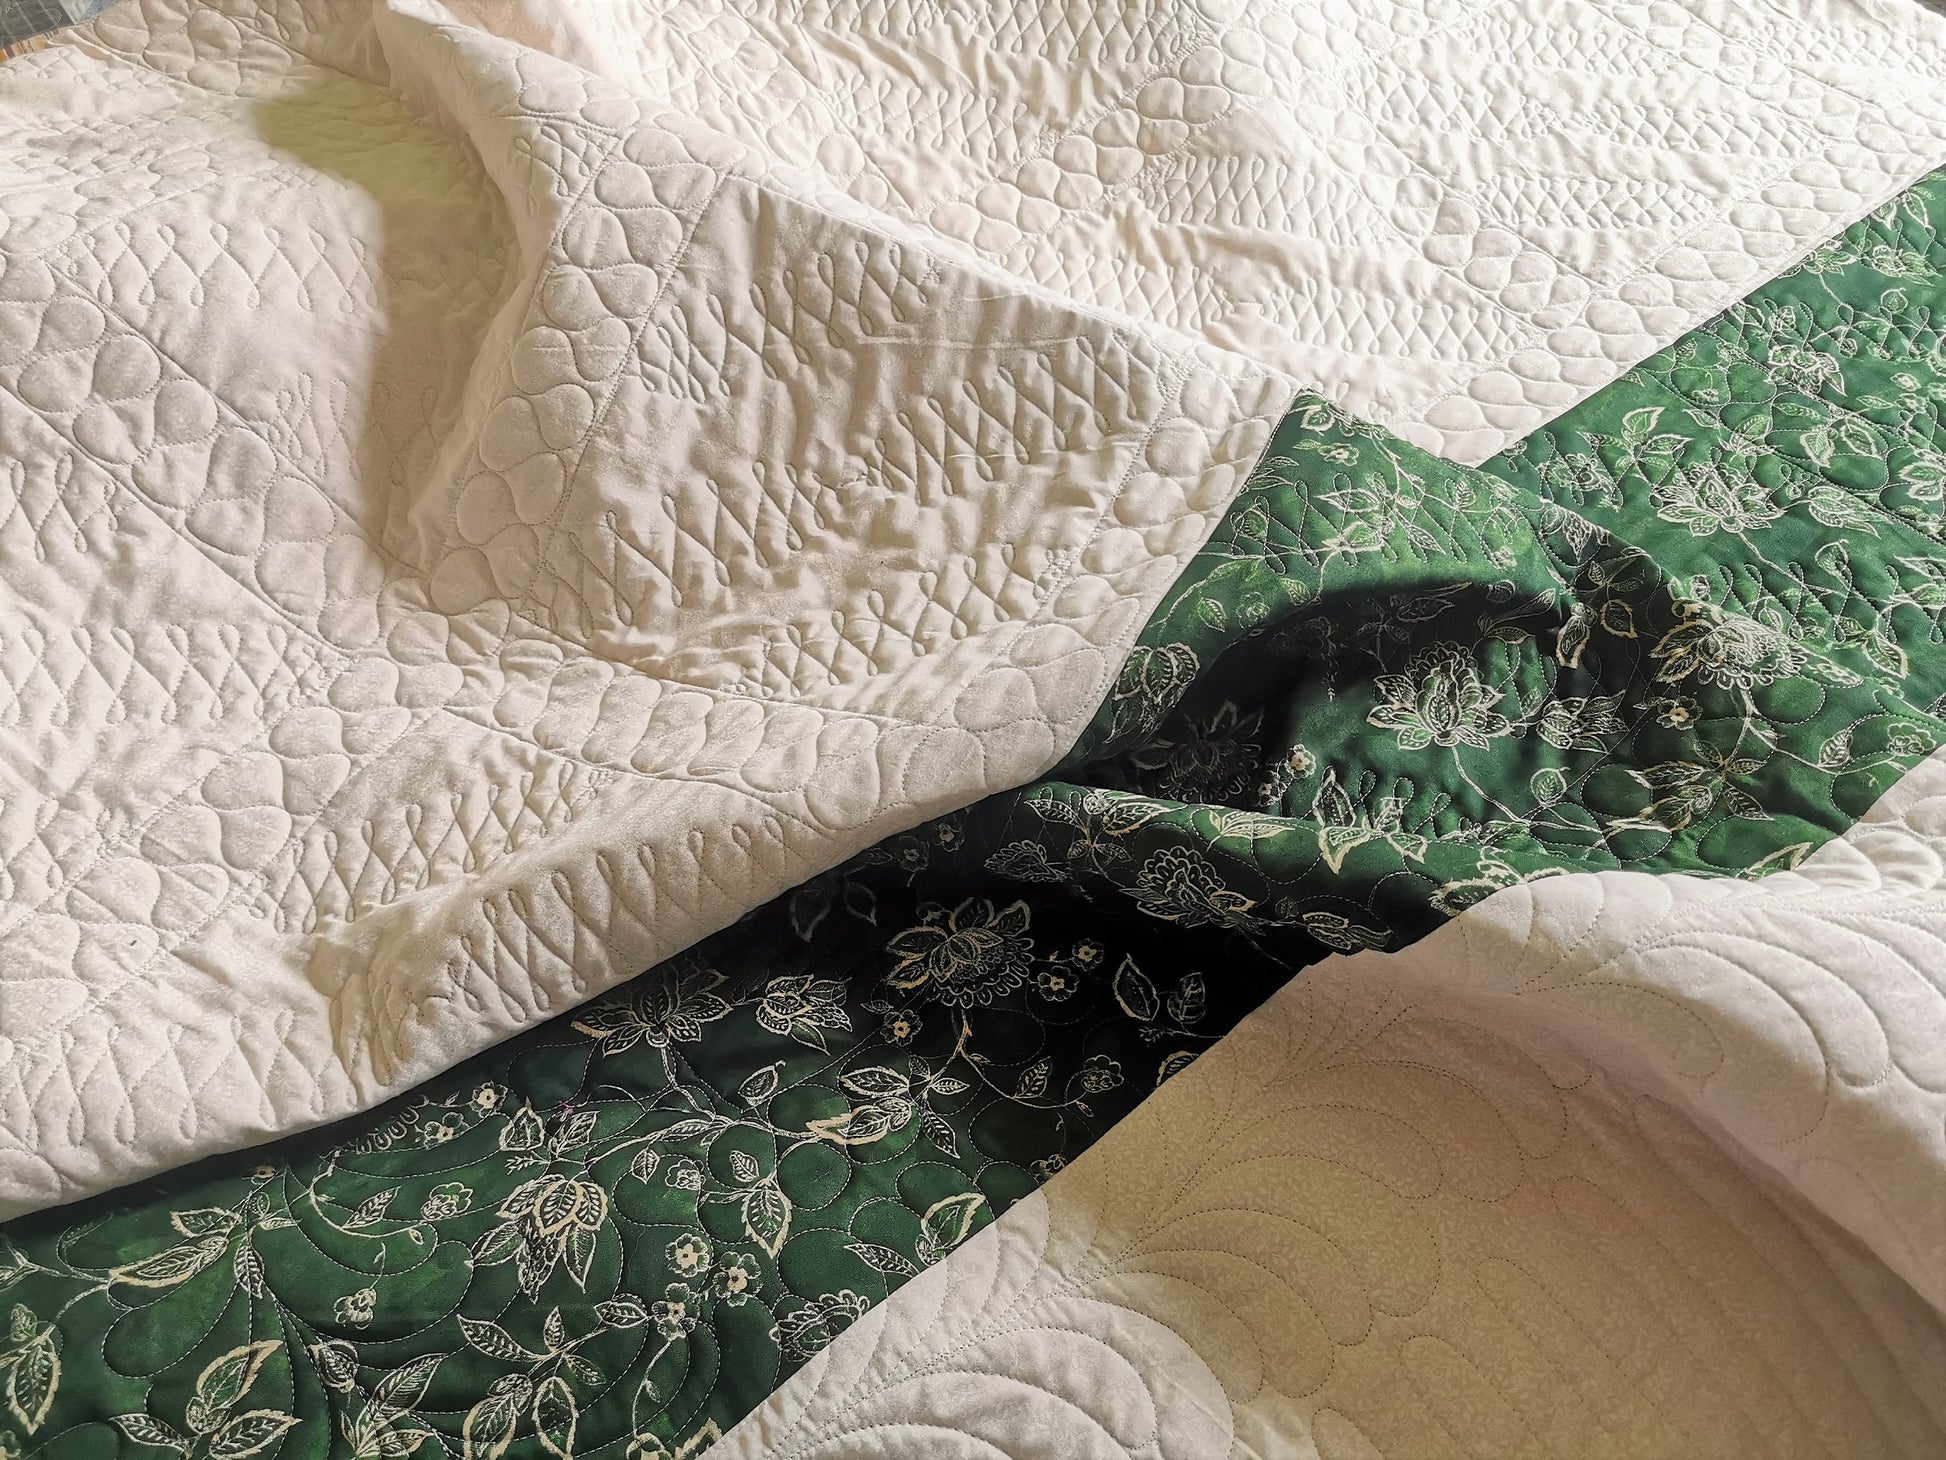 This shows the back of the vintage bed quilt. the backing is a tone on tone ecru print with a dark green stripe pieced across the one end. Stitching detail is easily seen on the back. 